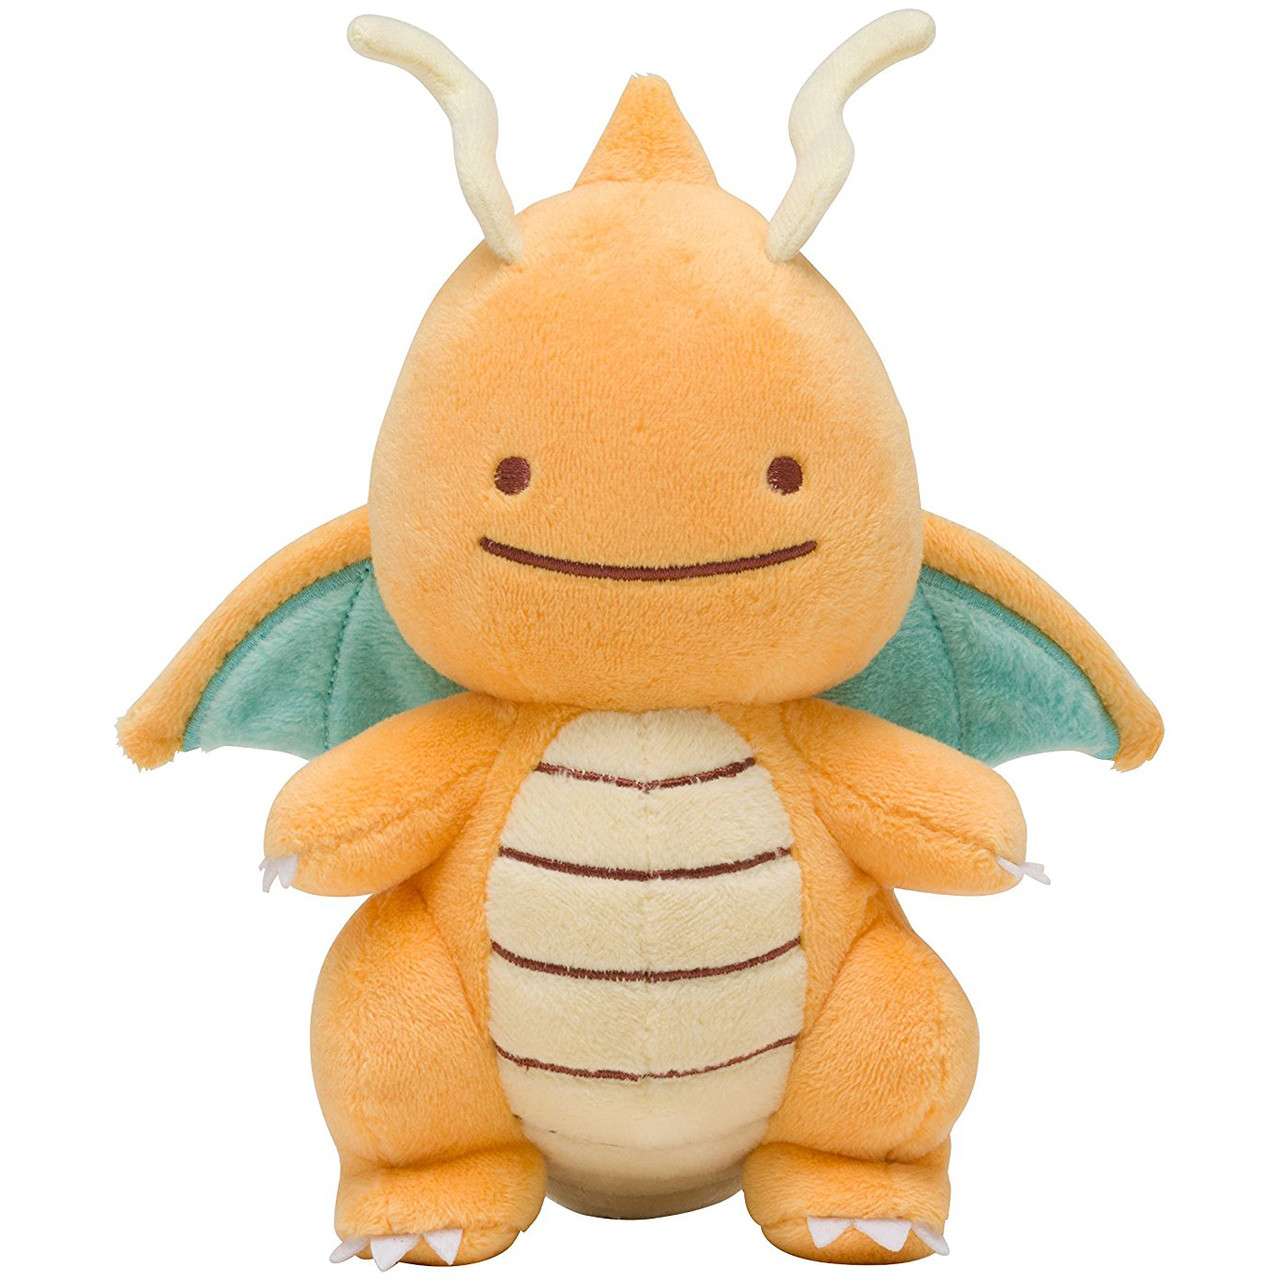 Pokemon Center's Newest Transform! Ditto Plushies Are Out Now